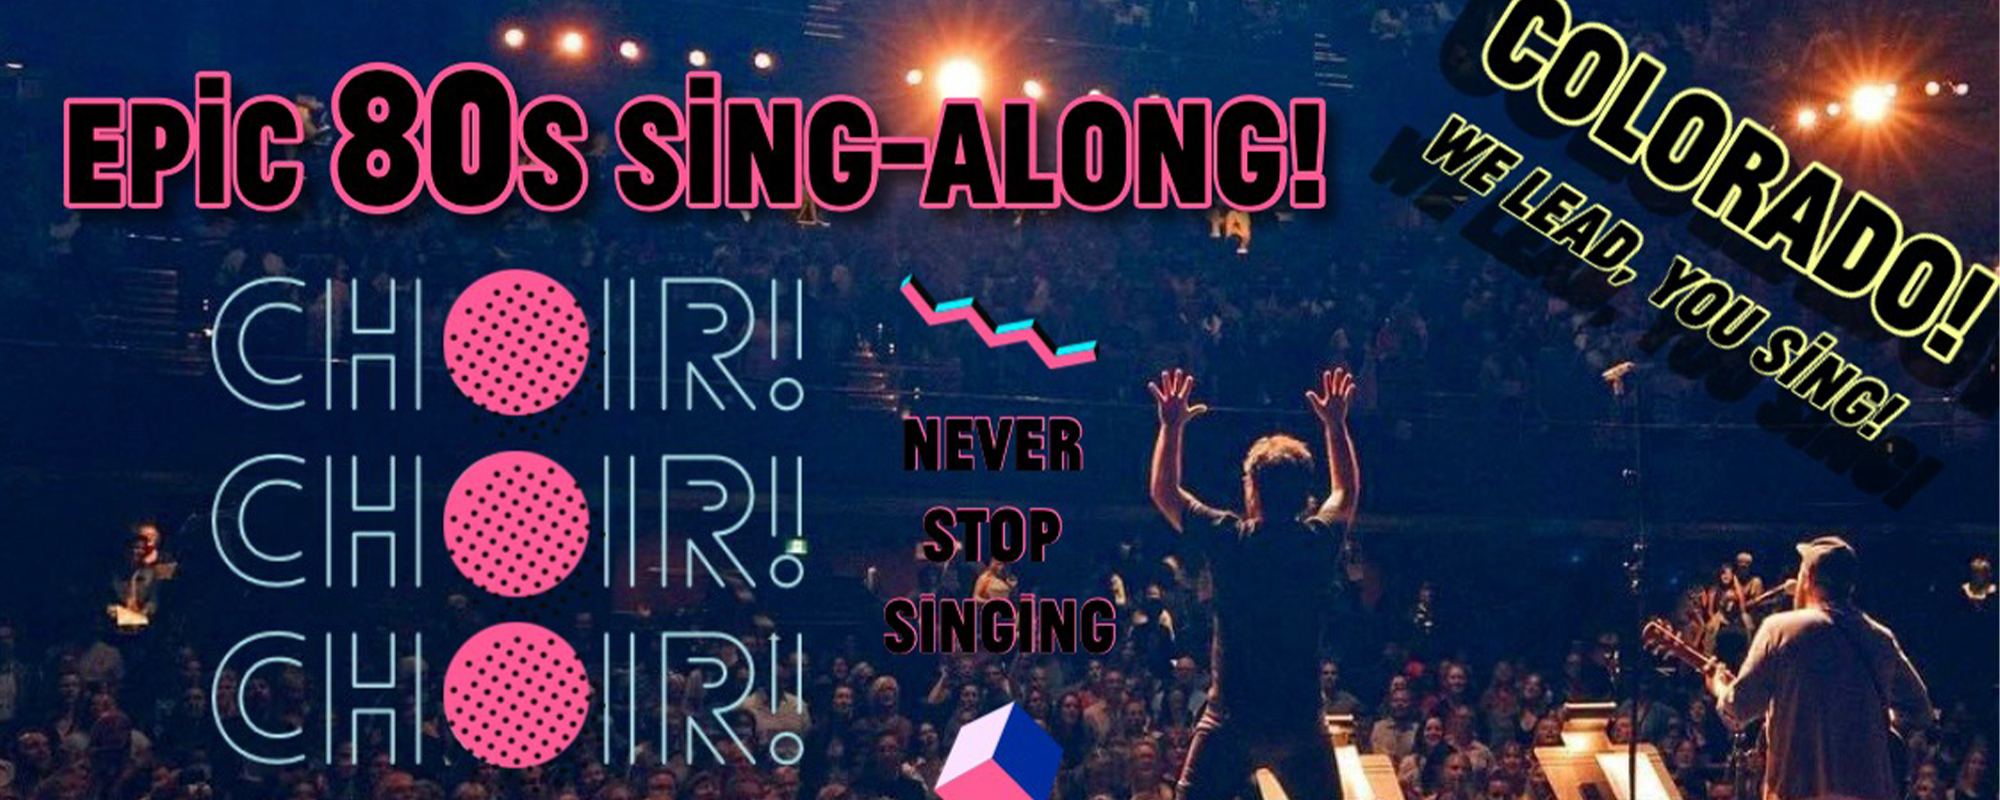 A graphic for Choir! Choir! Choir! that is inspired by the 80s with florescent colors. Text reads "Epic 80s sing-along! Colorado! We lead, you sing!" and "never stop singing"